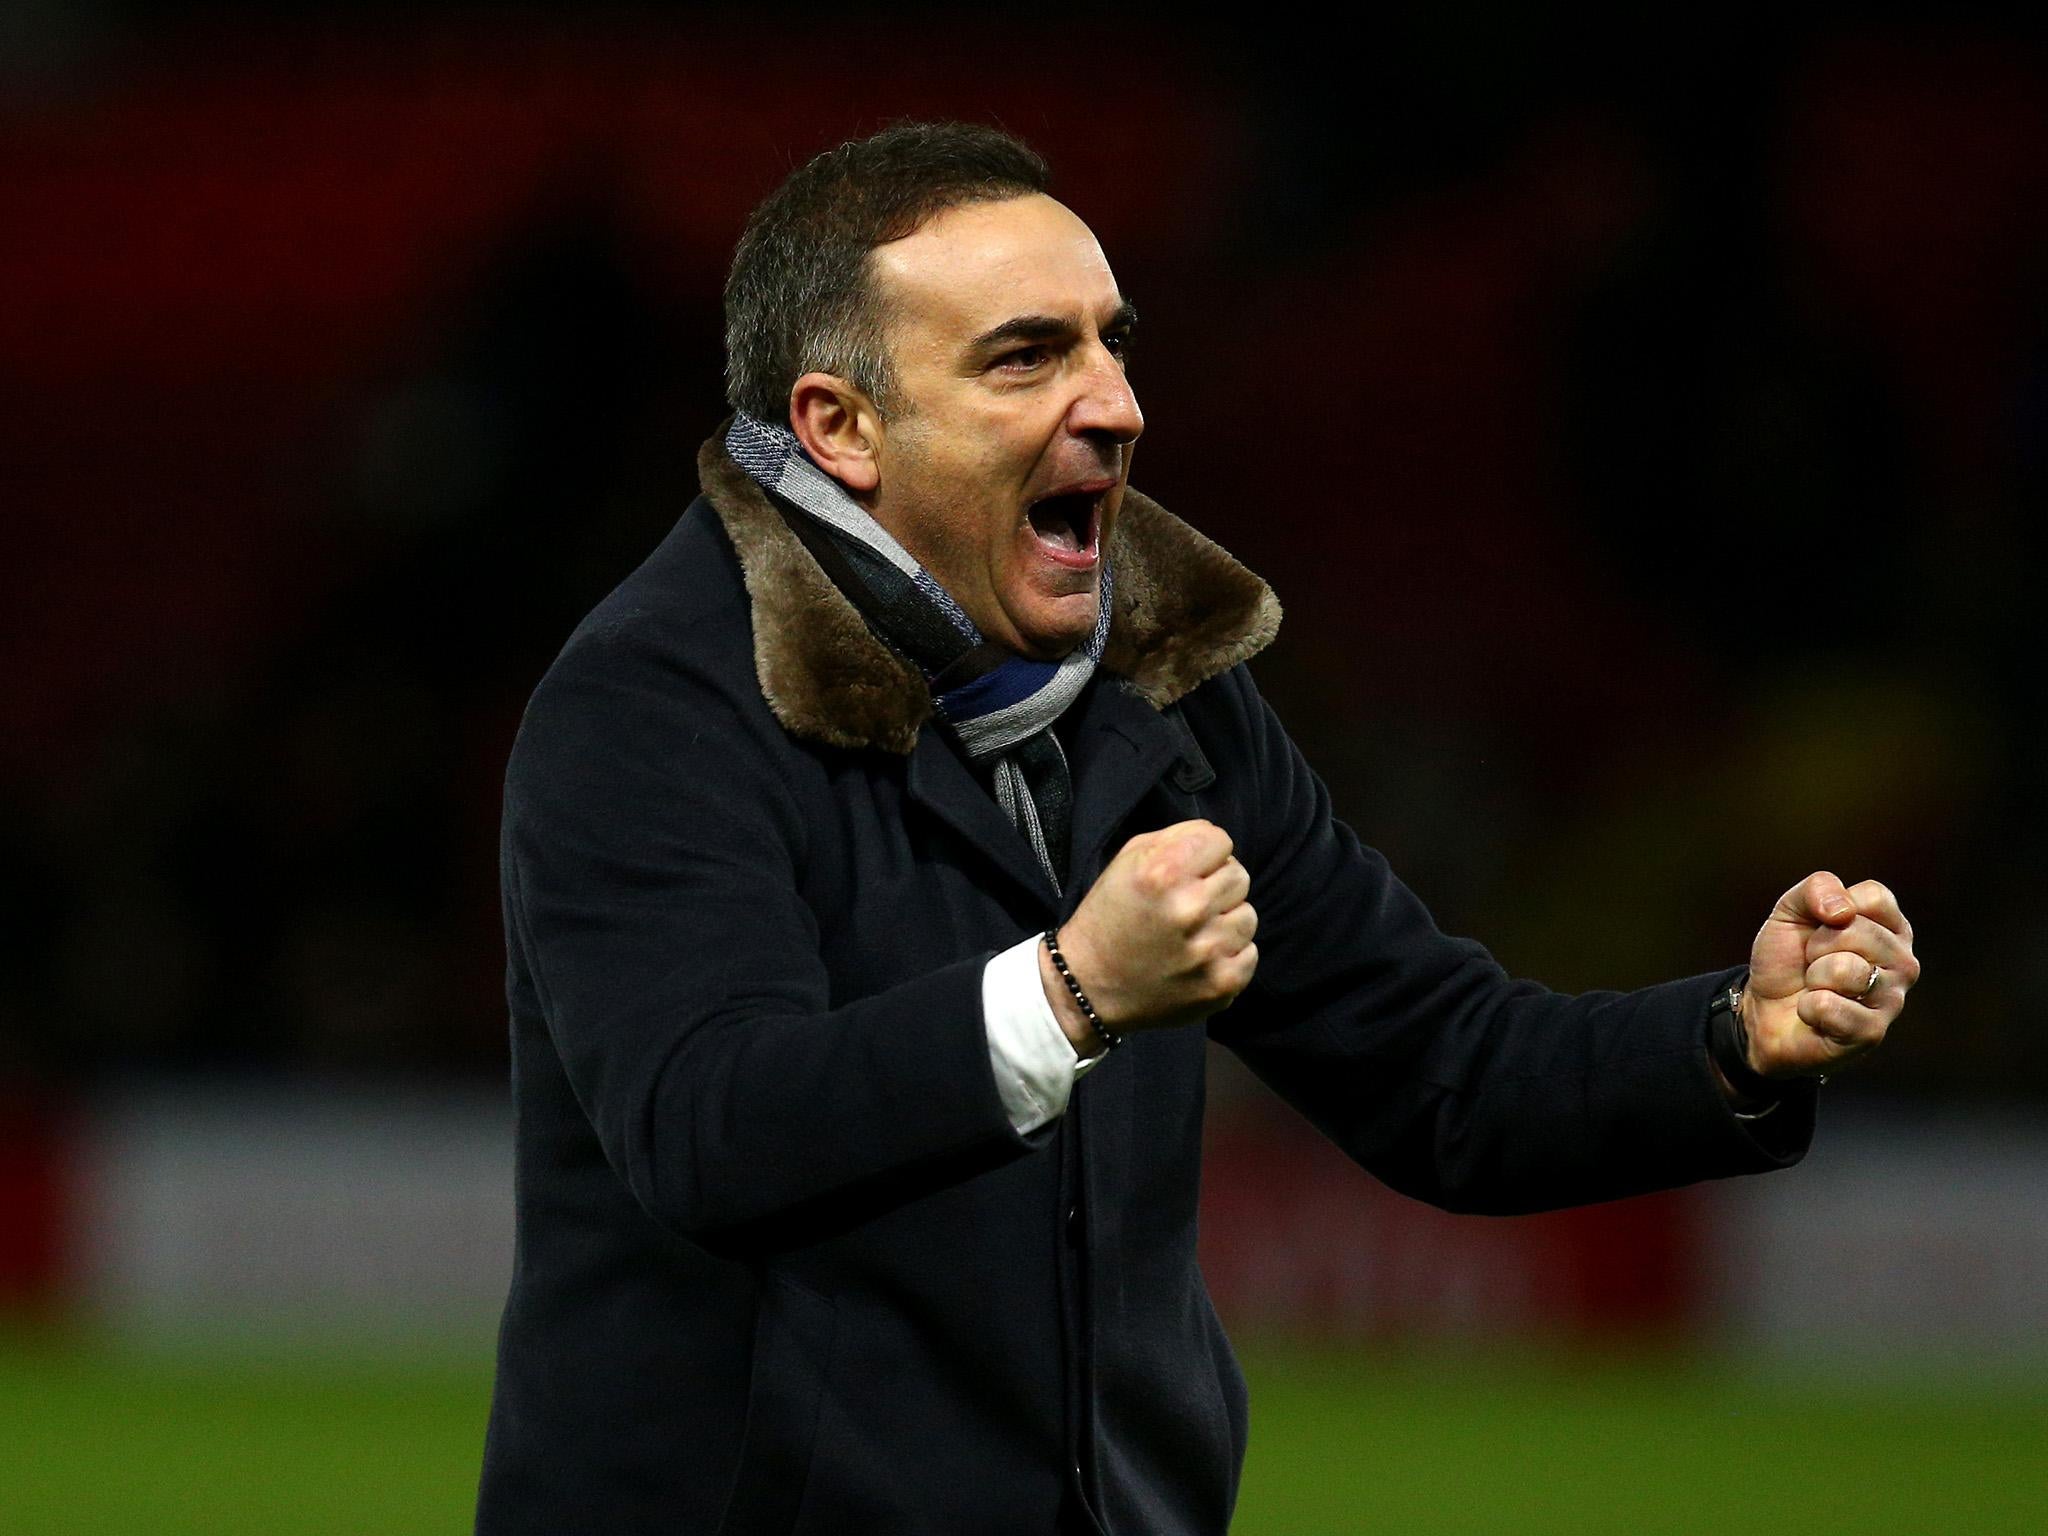 Carlos Carvalhal celebrates after the final whistle at Vicarage Road